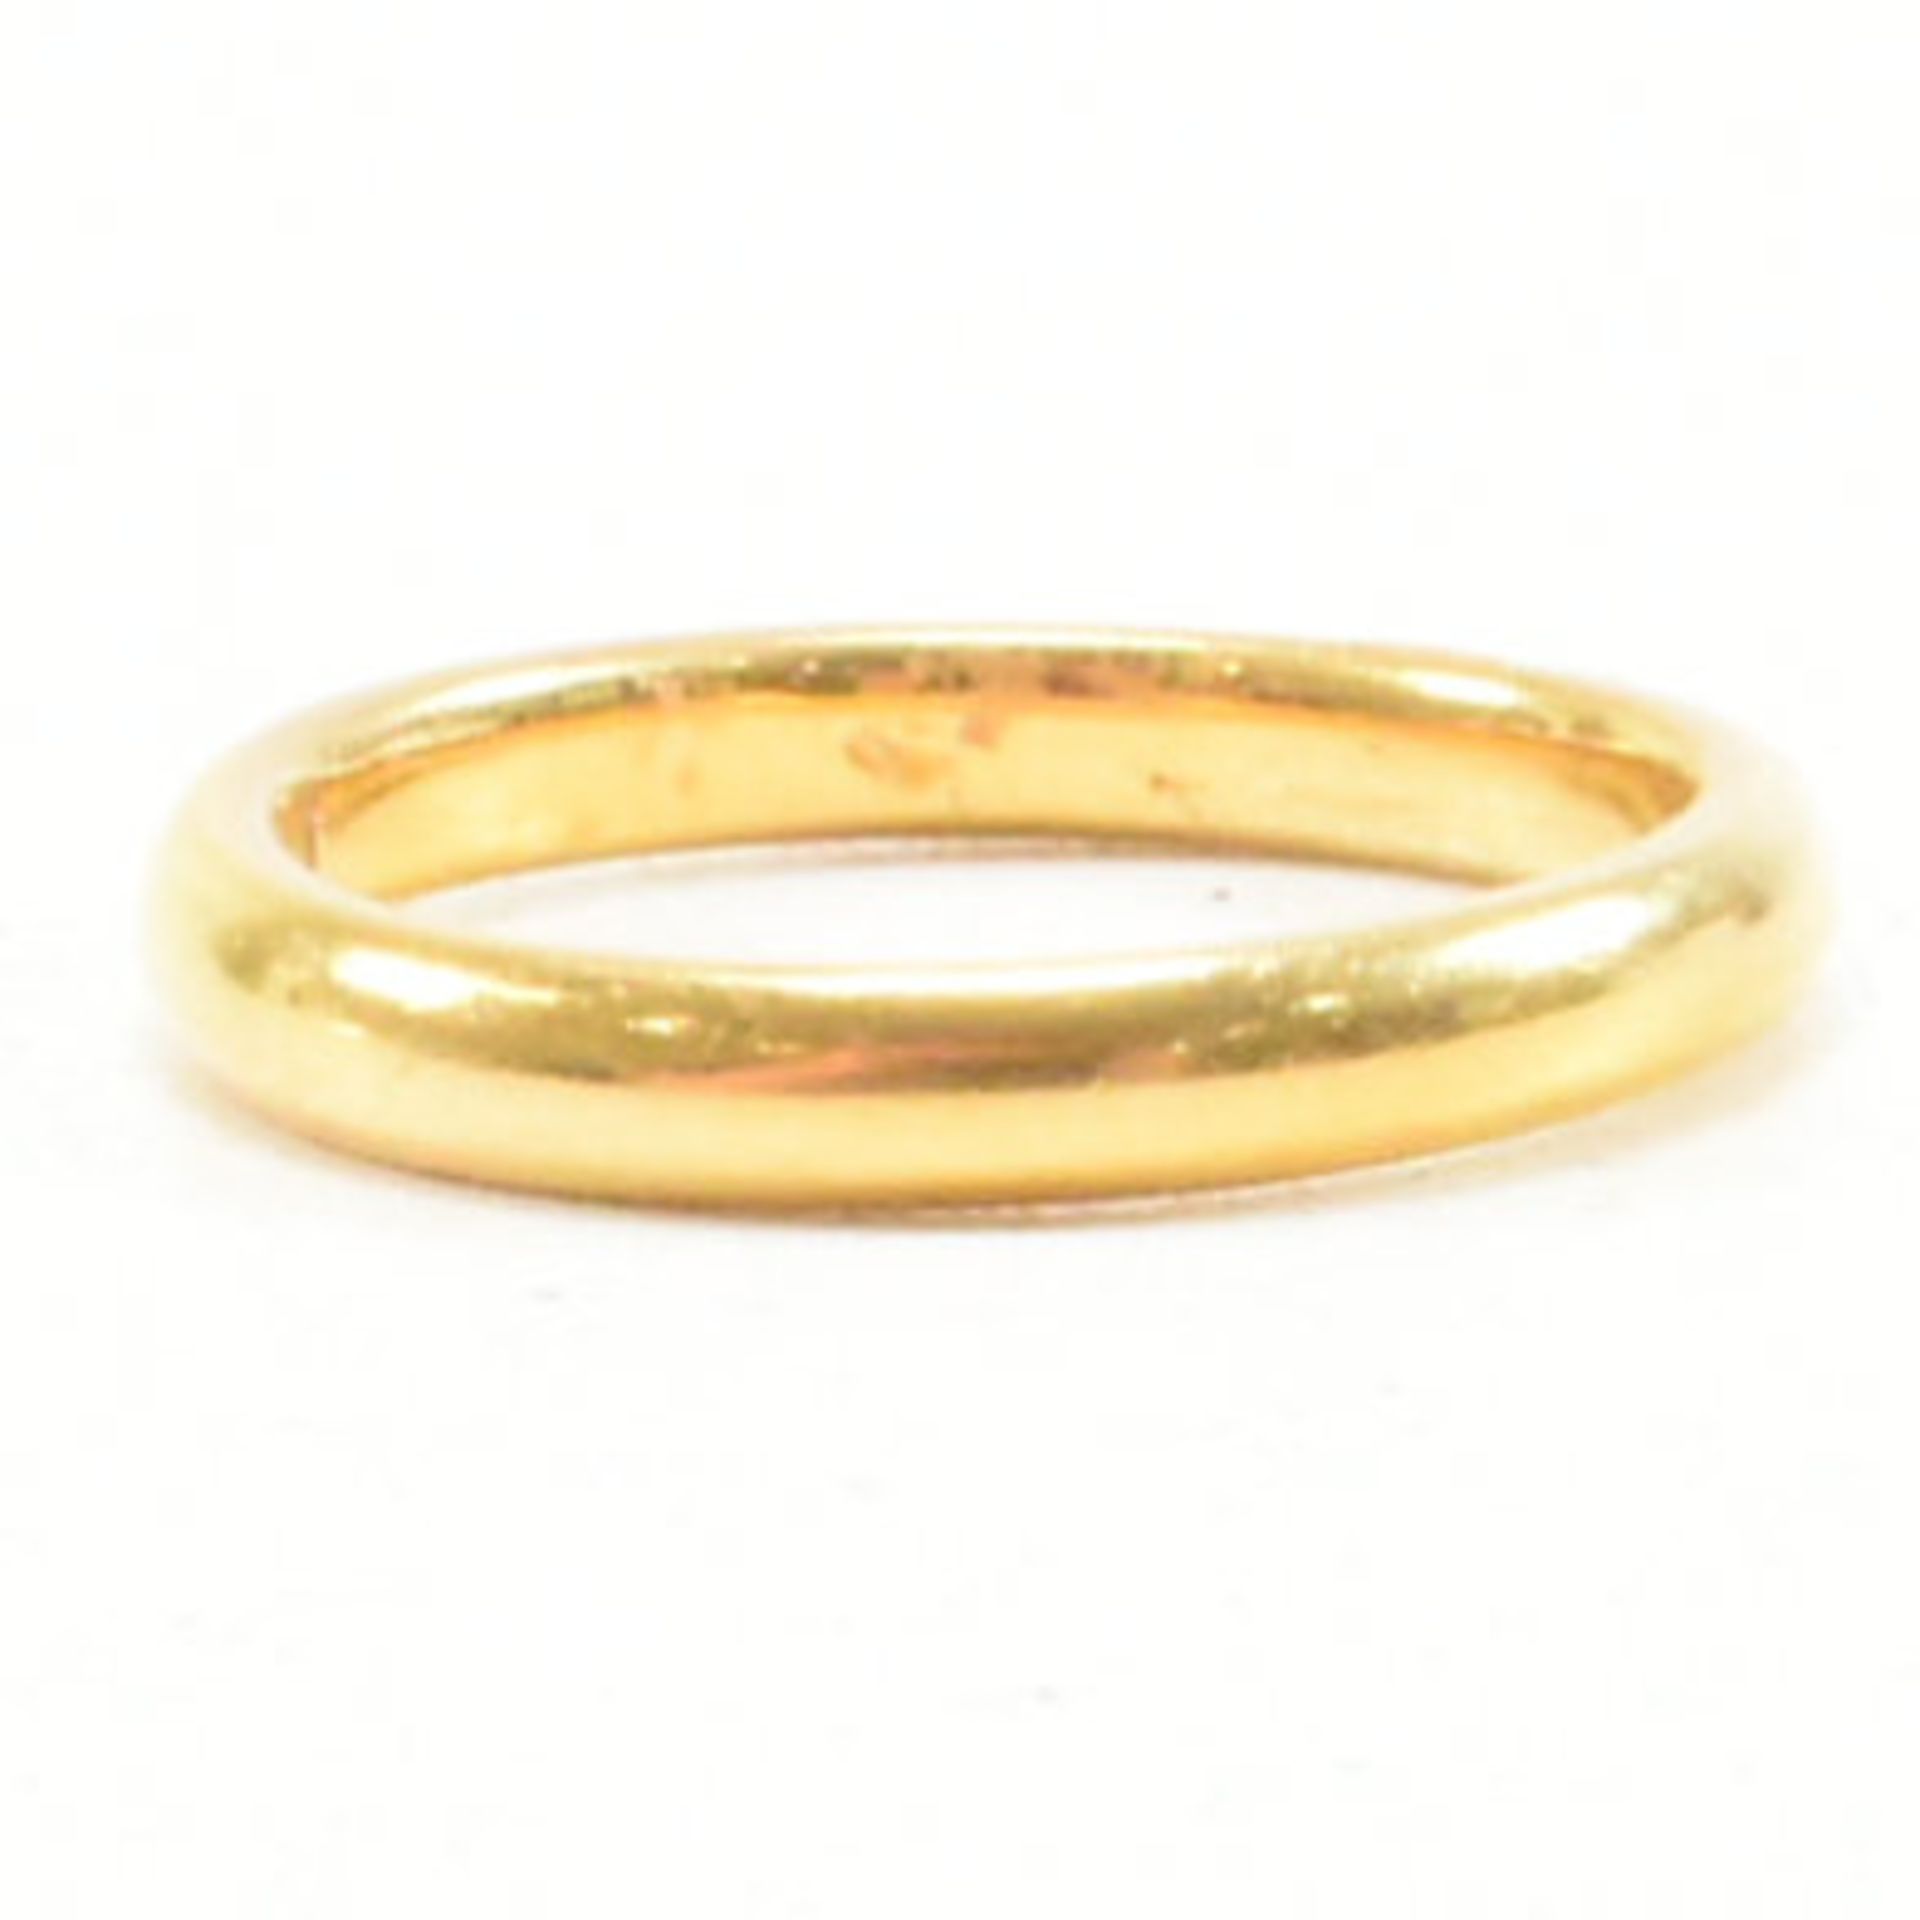 HALLMARKED 22CT GOLD BAND RING - Image 2 of 8